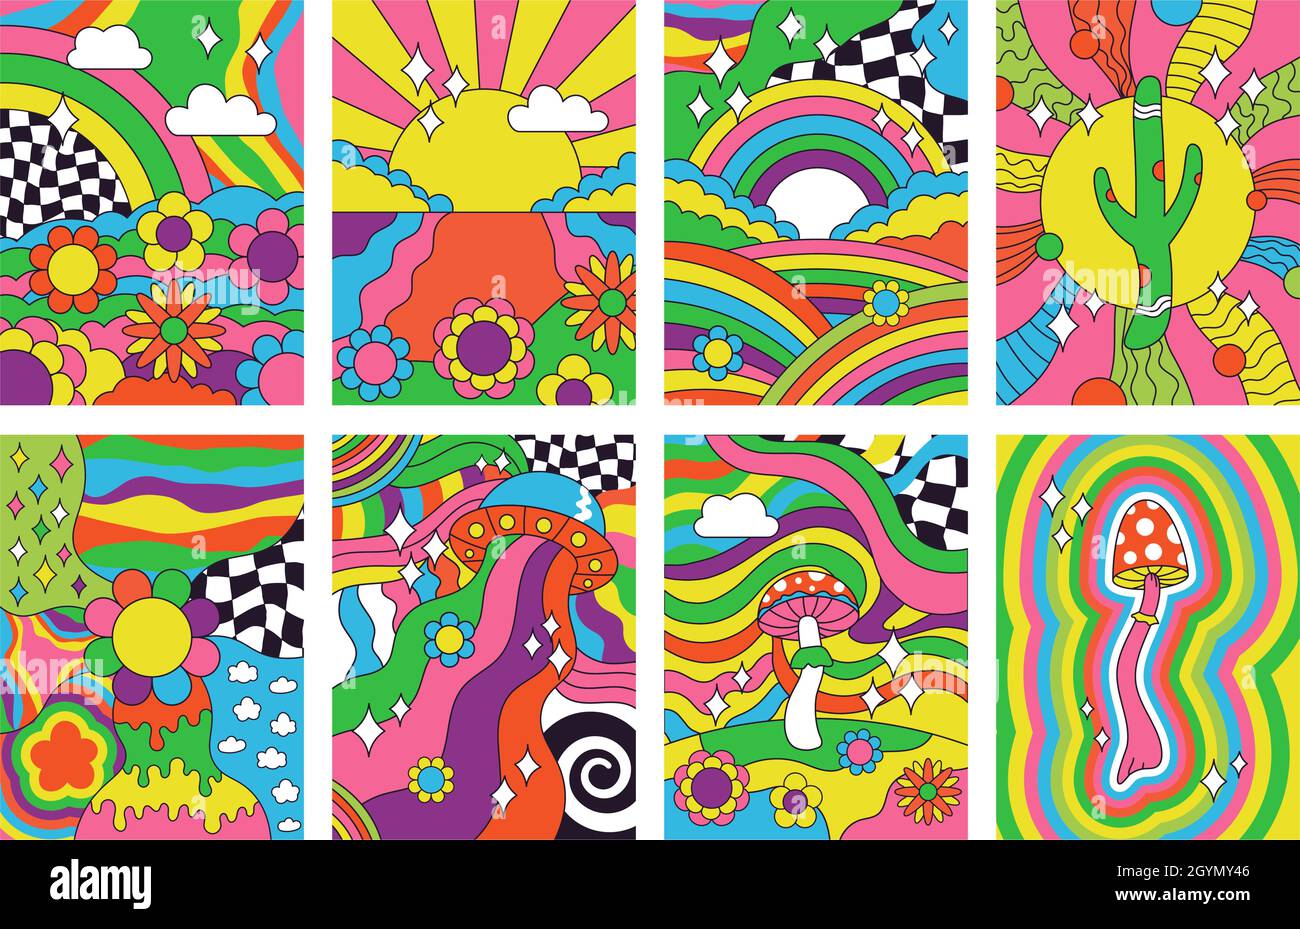 https://c8.alamy.com/comp/2GYMY46/groovy-retro-vibes-70s-hippie-style-psychedelic-art-posters-abstract-psychedelic-hippie-rainbow-landscape-60s-posters-vector-illustration-set-2GYMY46.jpg